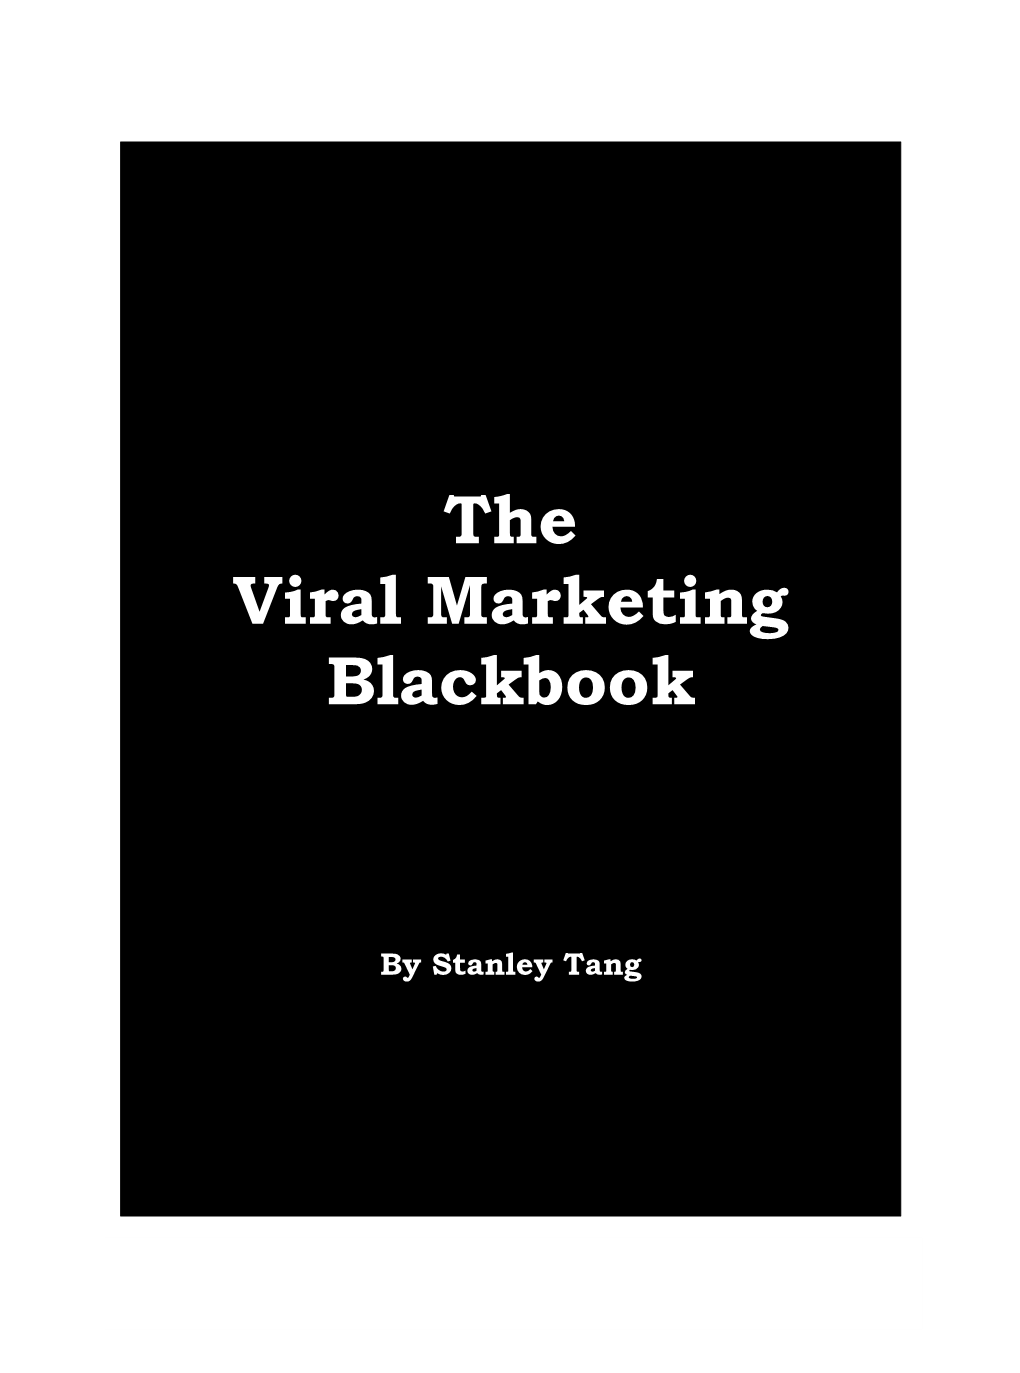 The Viral Marketing Blackbook – by Stanley Tang